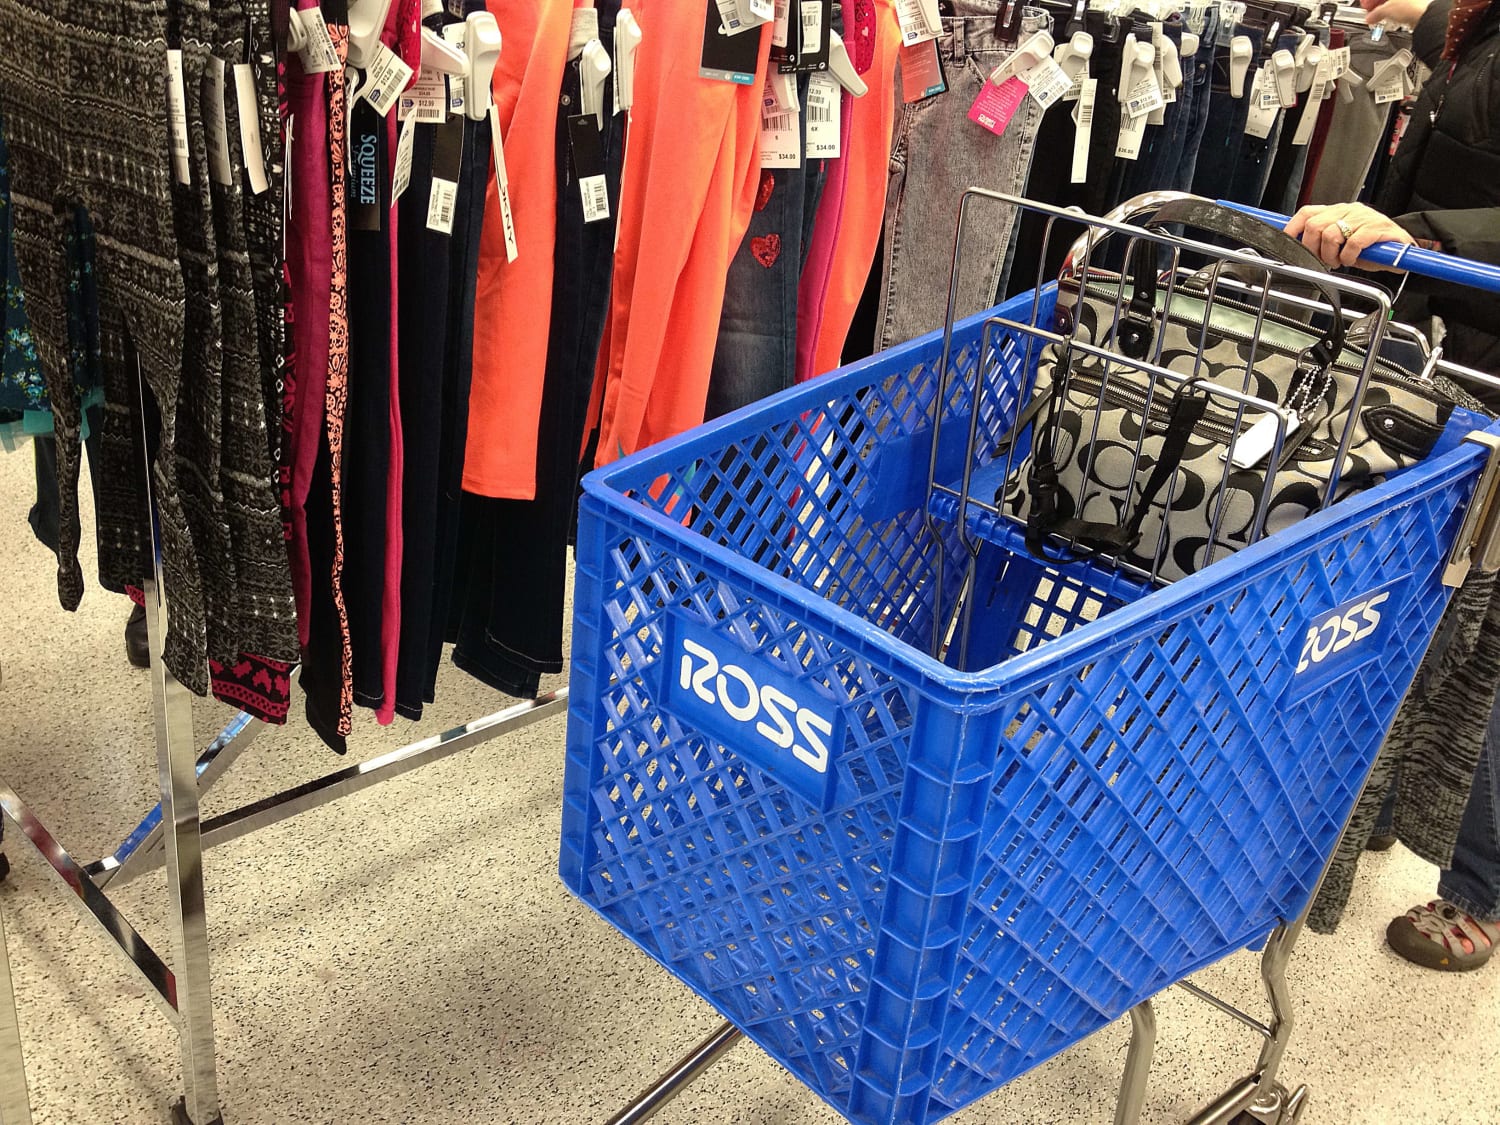 Stocks making the biggest moves after hours: Ross Stores, Splunk, Palo Alto Networks and more